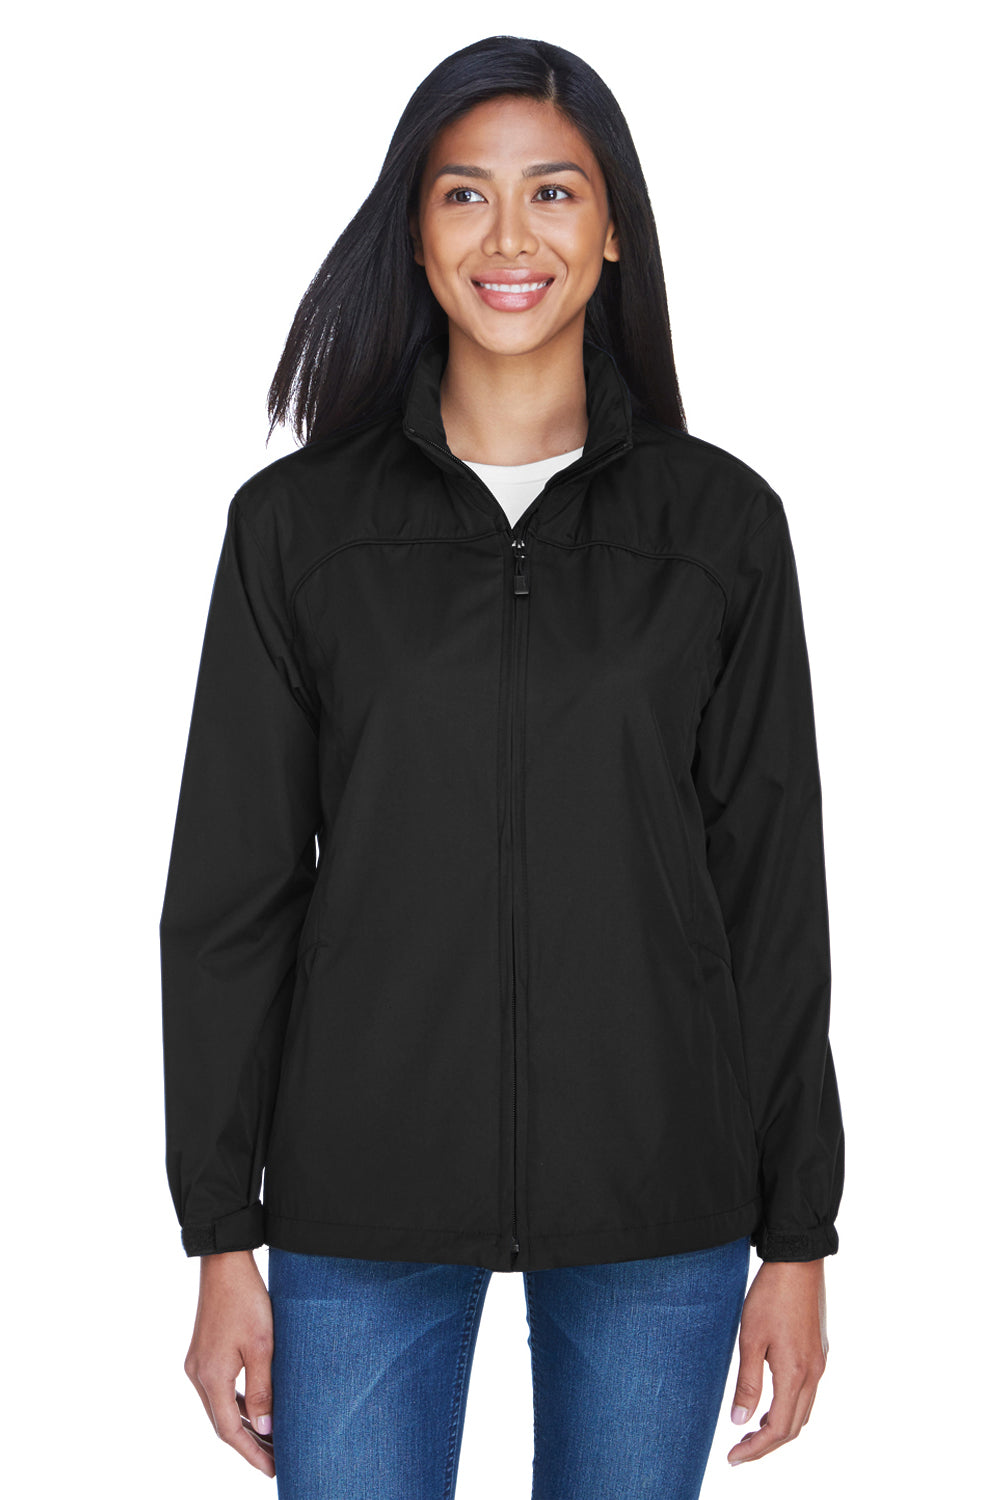 North End 78032 Womens Techno Lite Water Resistant Full Zip Hooded Jacket Black Front